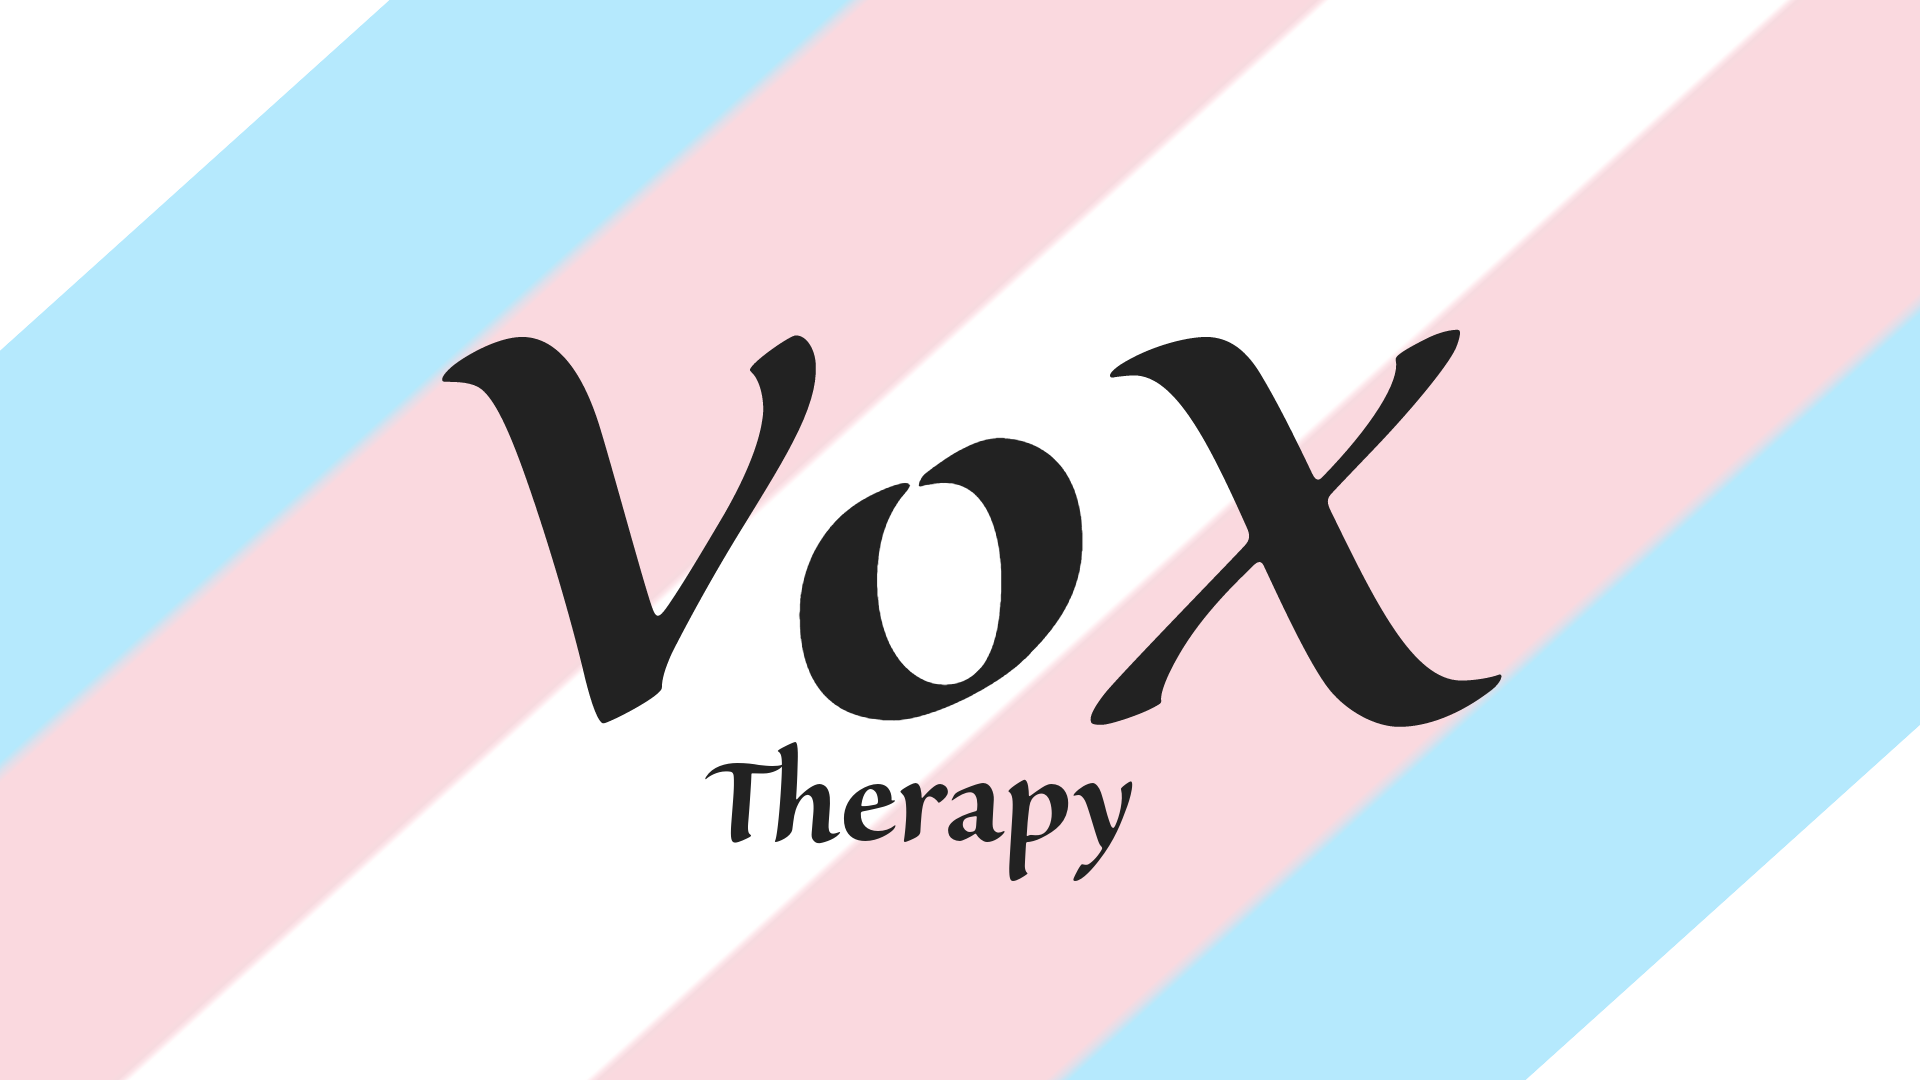 Vox Therapy